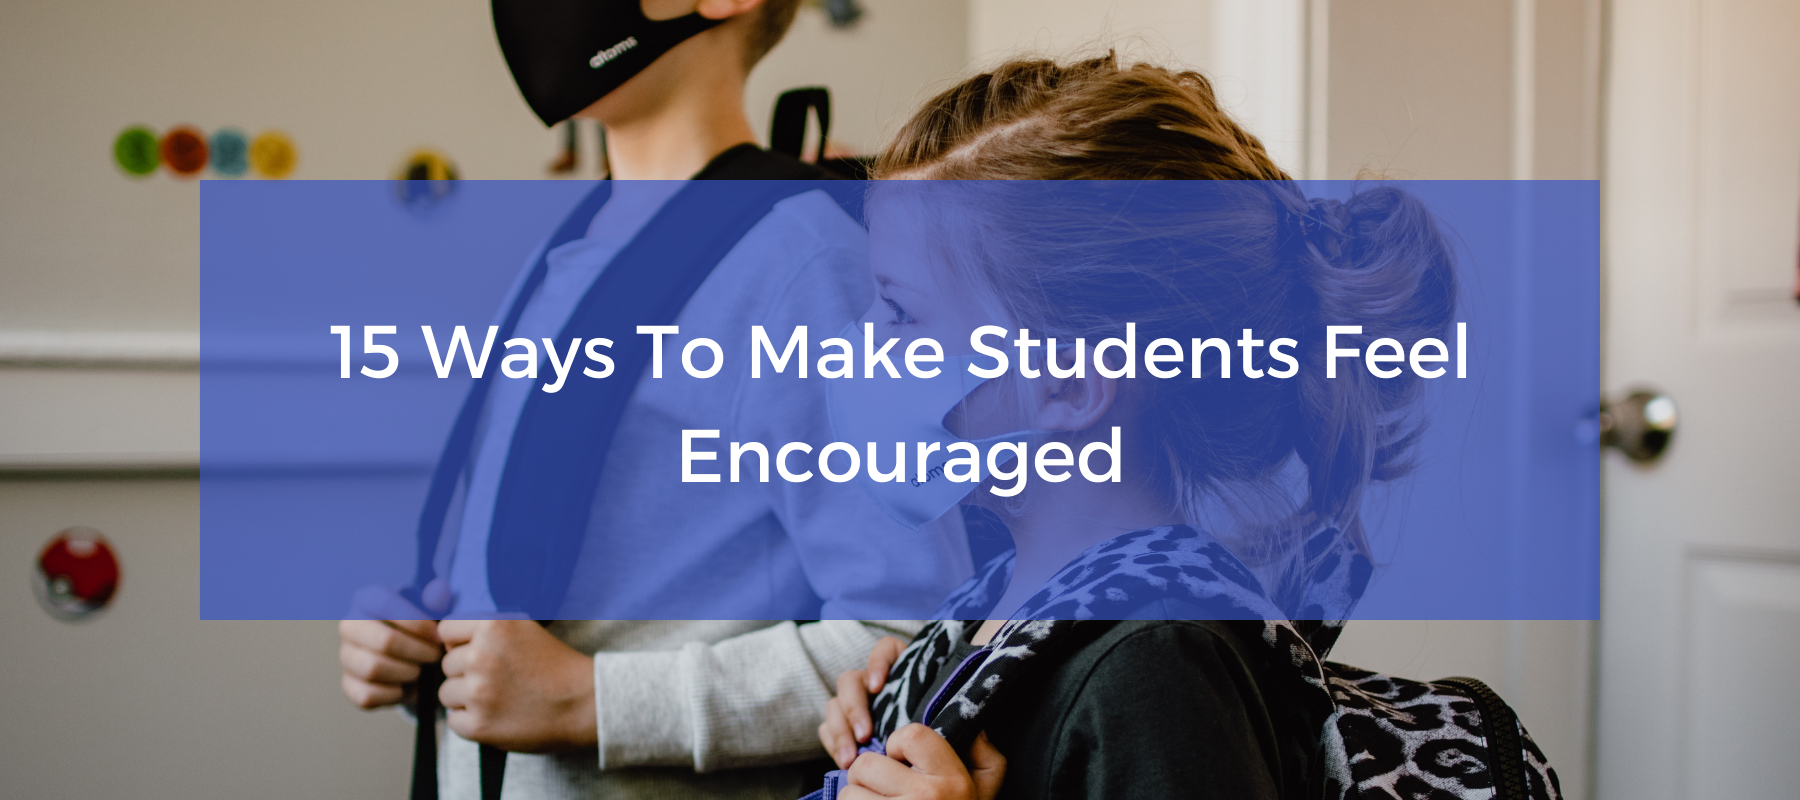 15 Ways To Make Students Feel Encouraged featured.